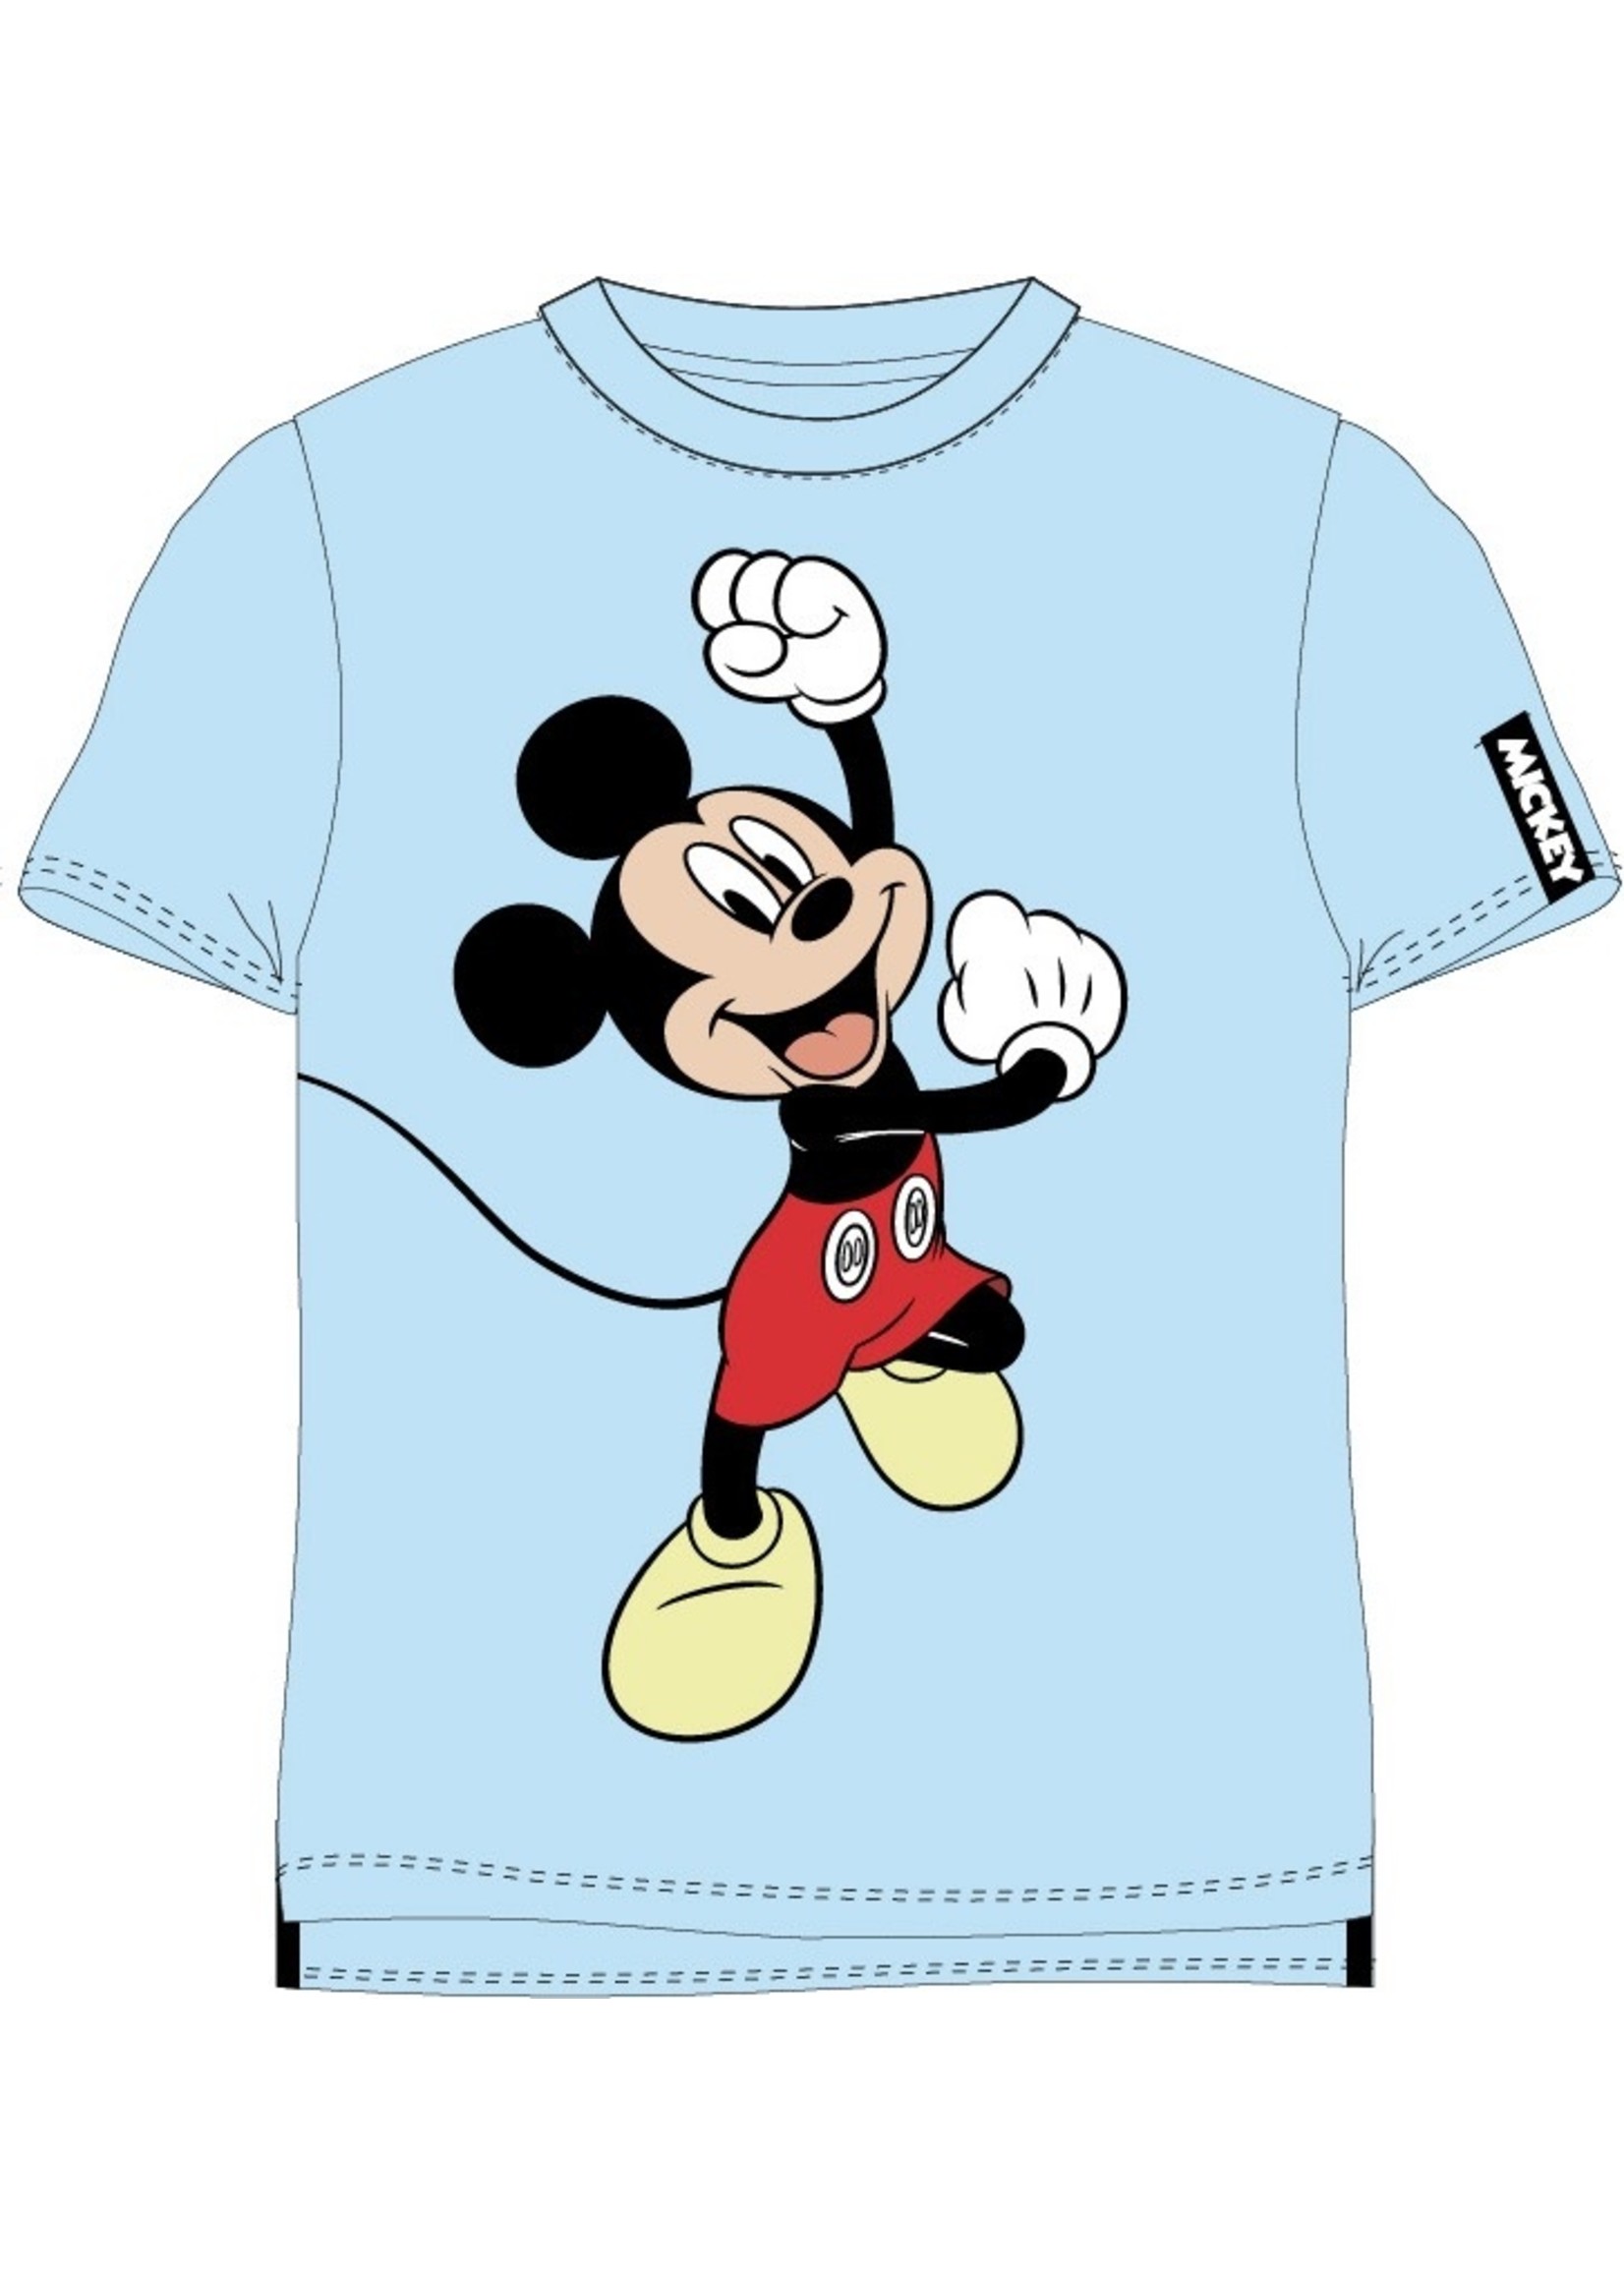 Disney Mickey Mouse T-shirt from Disney blue